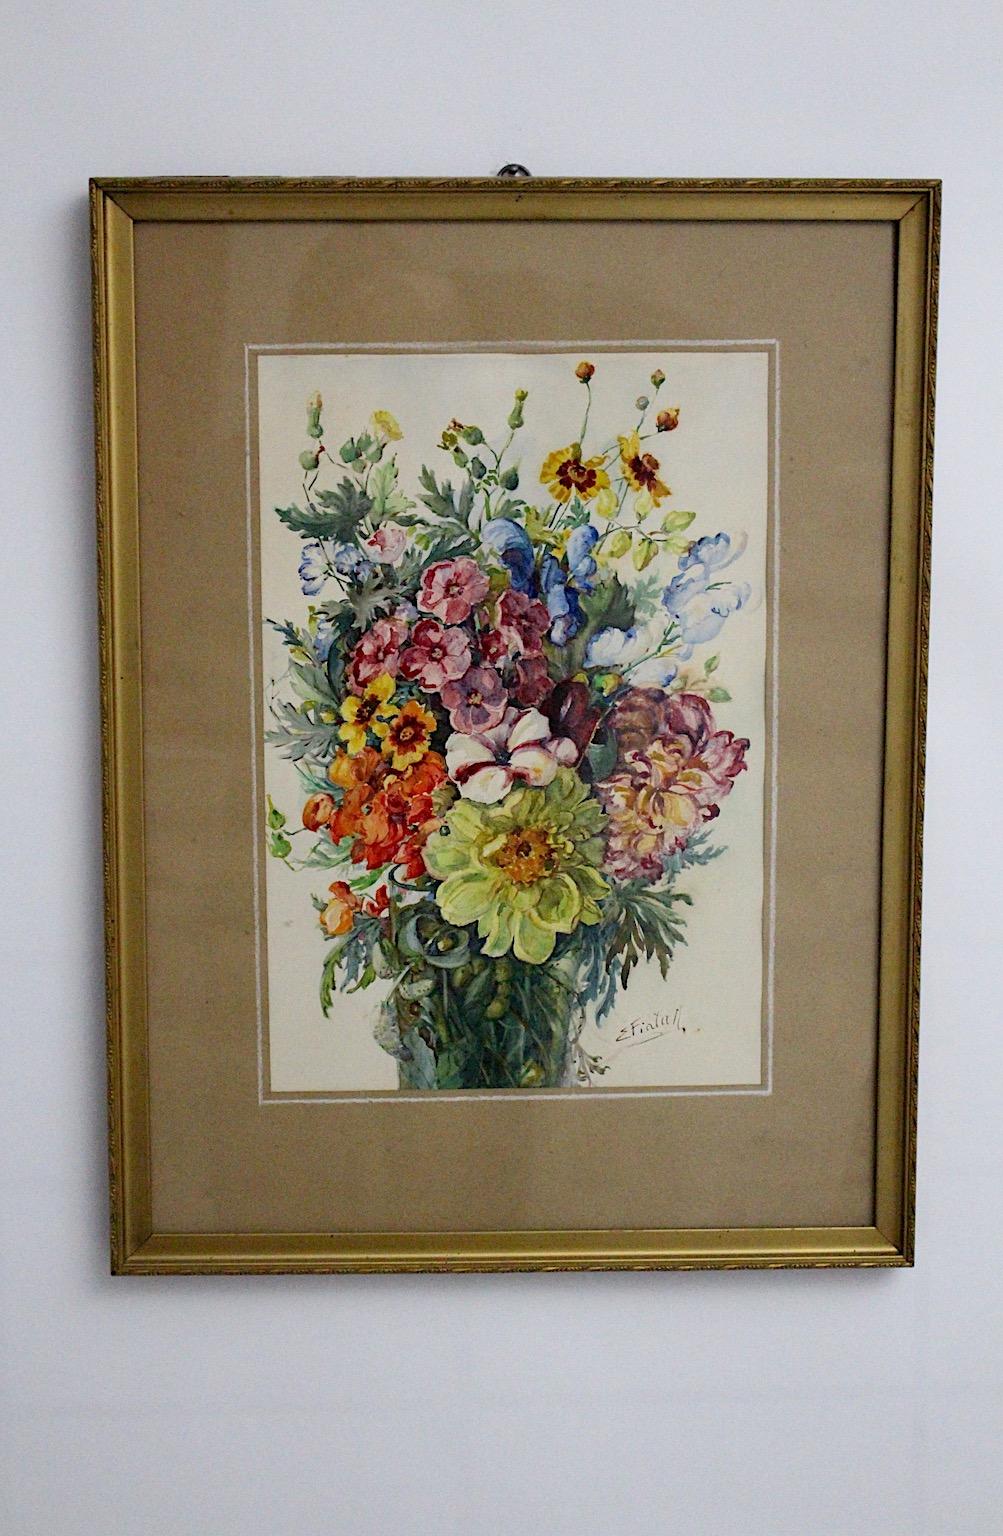 Art Deco watercolor vintage painting wildflowers by Emil Fiala 1930s Vienna.
Emil Fiala (1869-1960) was from 1915-1937 member of the Austrian Künstlerbund (formerly Hagenbund).
The delicate beautiful bouquet of wildflowers is painted with